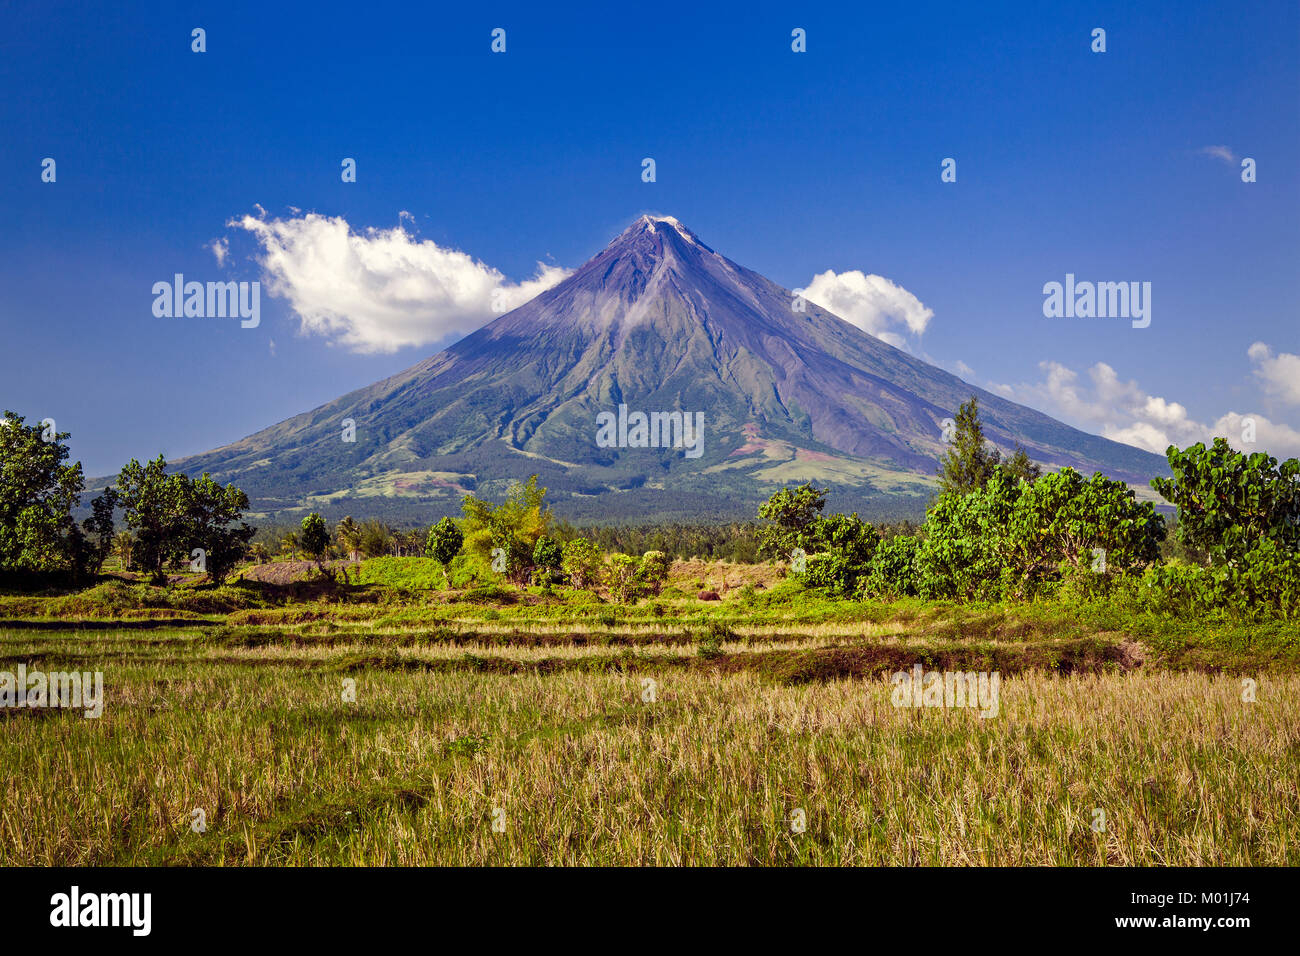 Mount Mayon Volcano is an active stratovolcano, in the province of Albay, Bicol, Philippines. Stock Photo